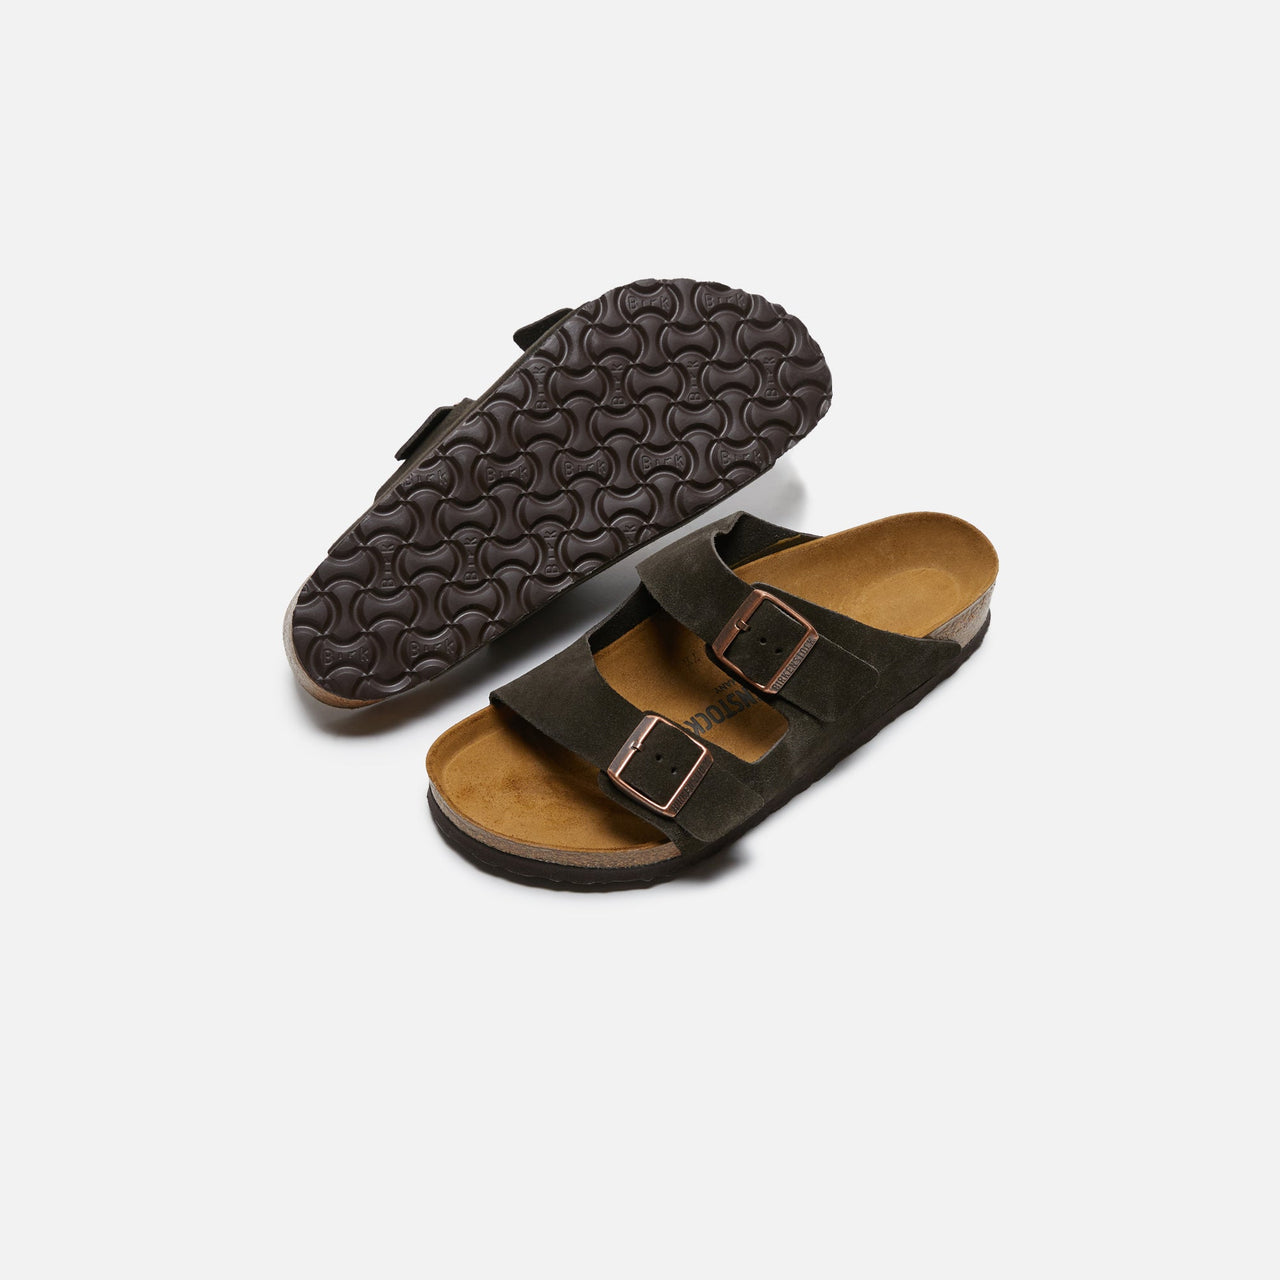  Birkenstock Arizona Suede Mocha sandal with durable EVA sole and arch support 